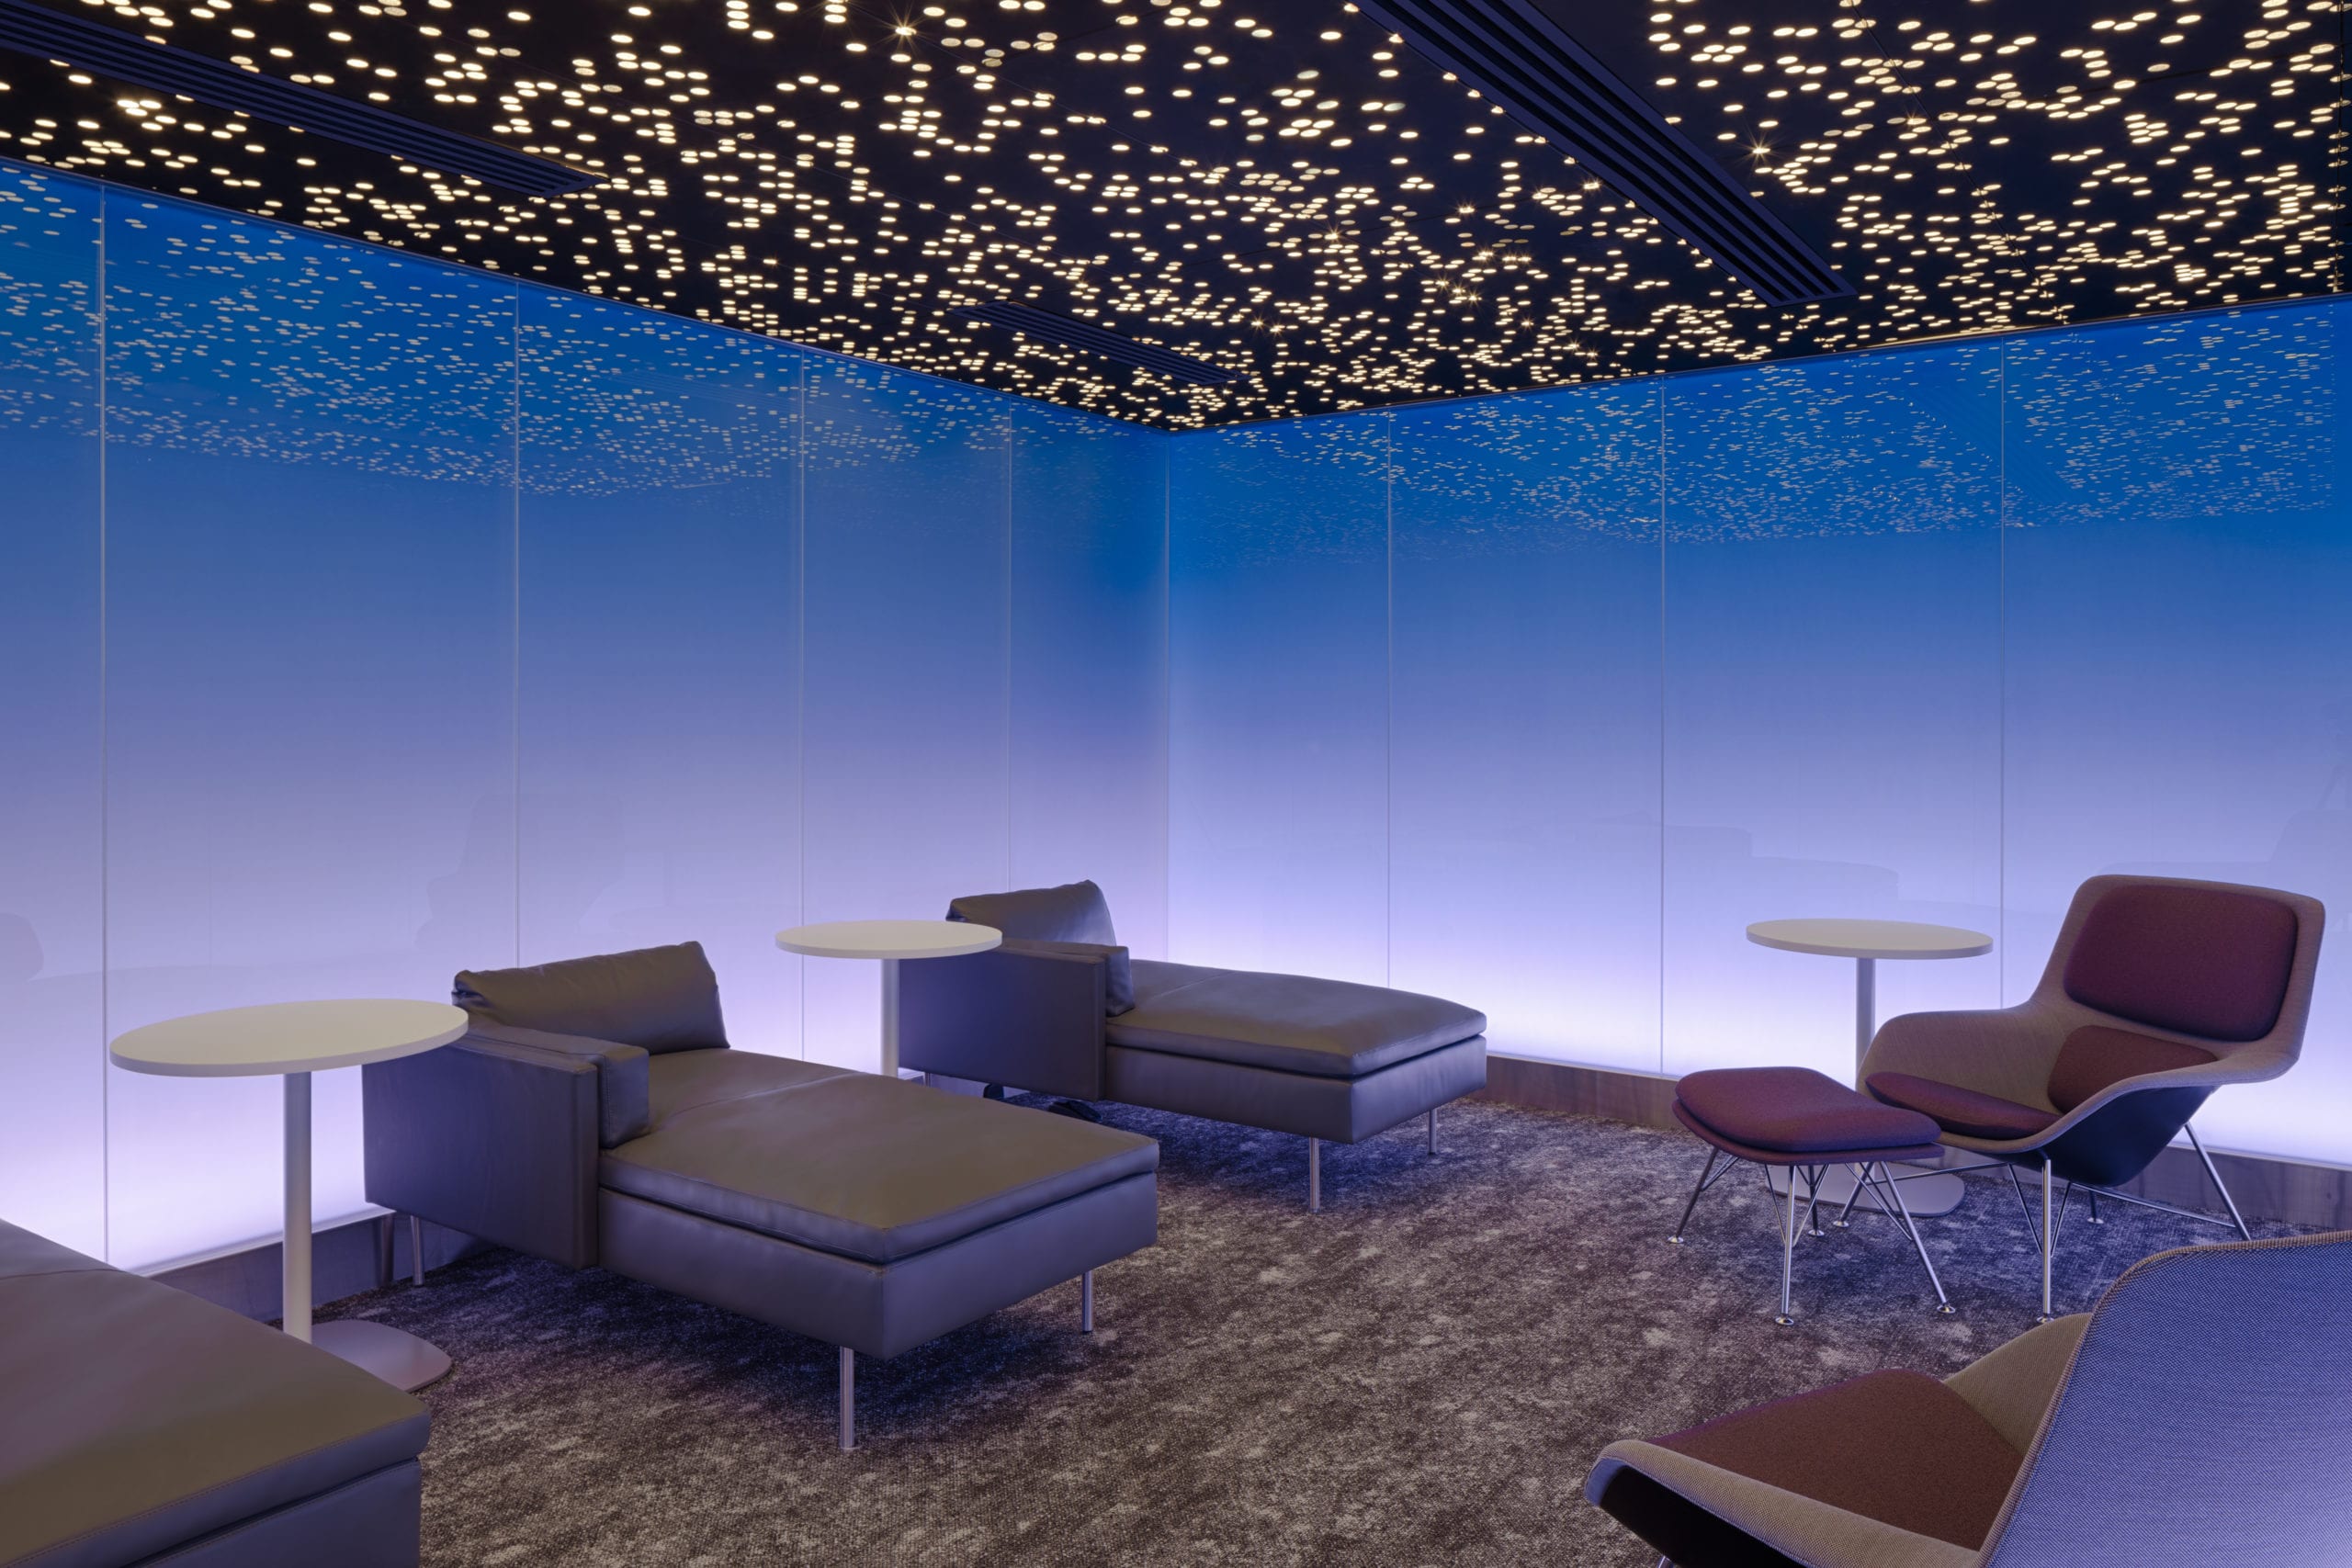 Moonrise Tranquility Room at Centurion Lounge at LAX scaled